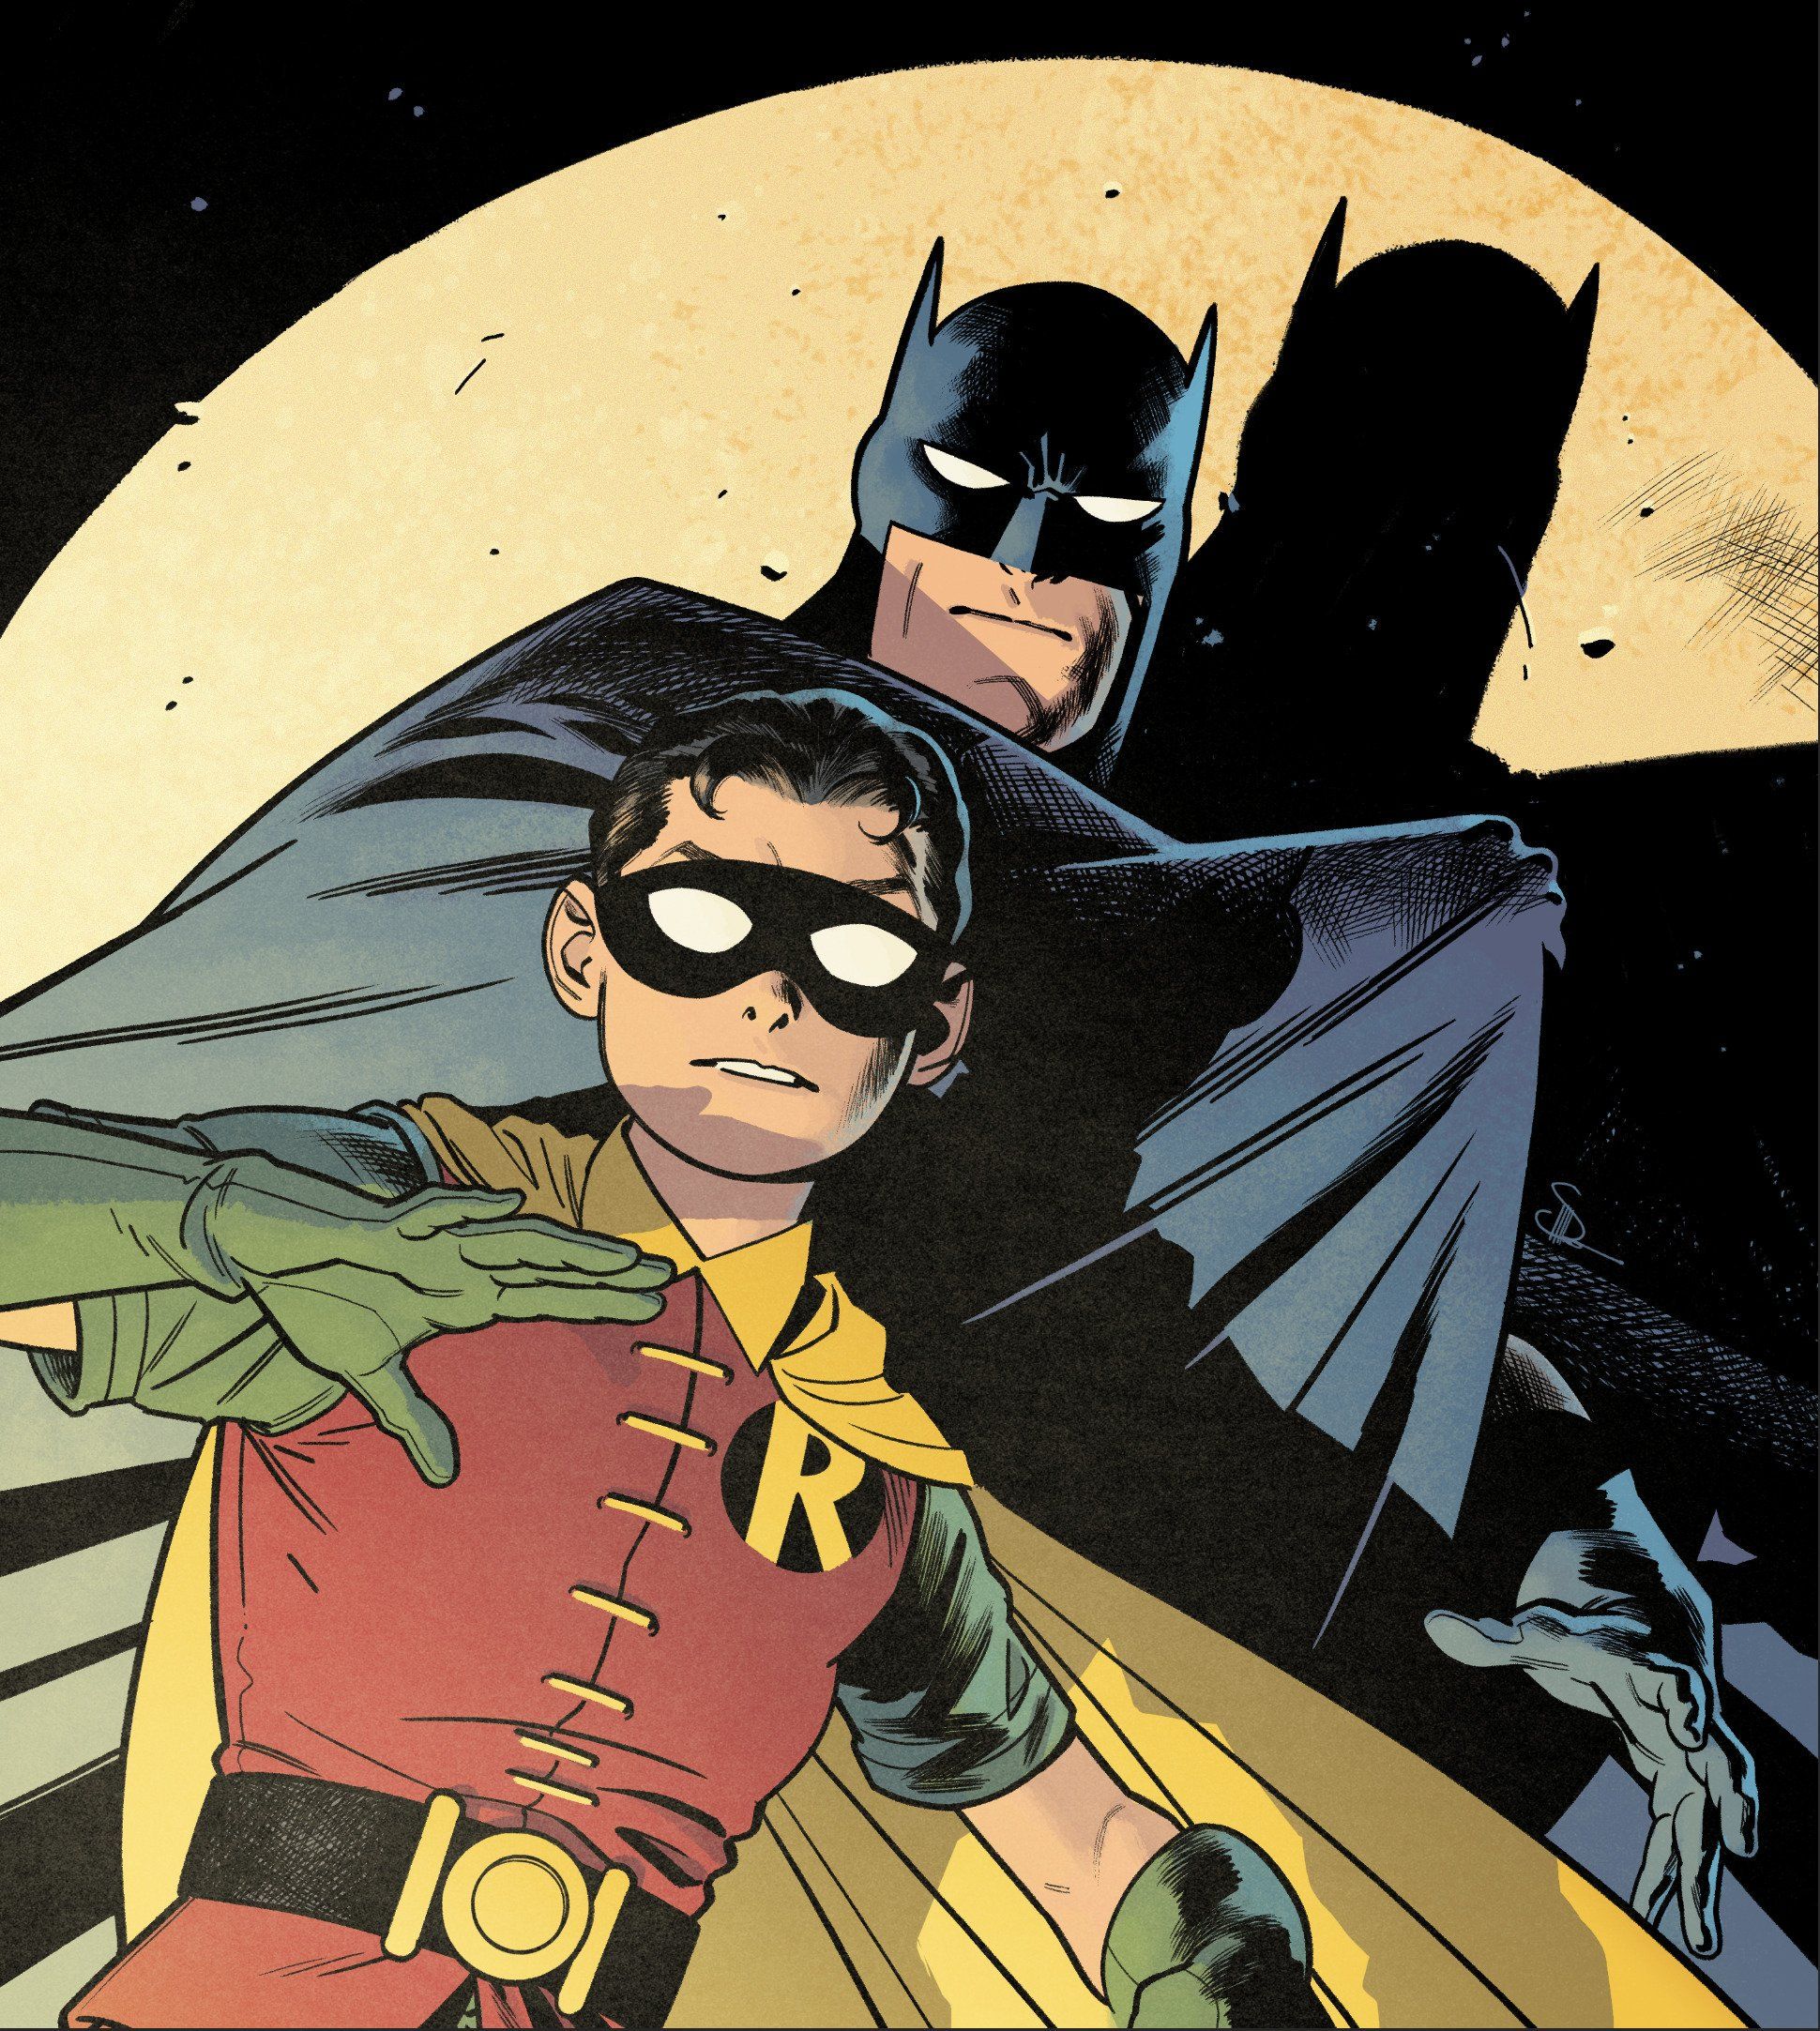 View, Download, Rate, and Comment on this Batman & Robin Art.